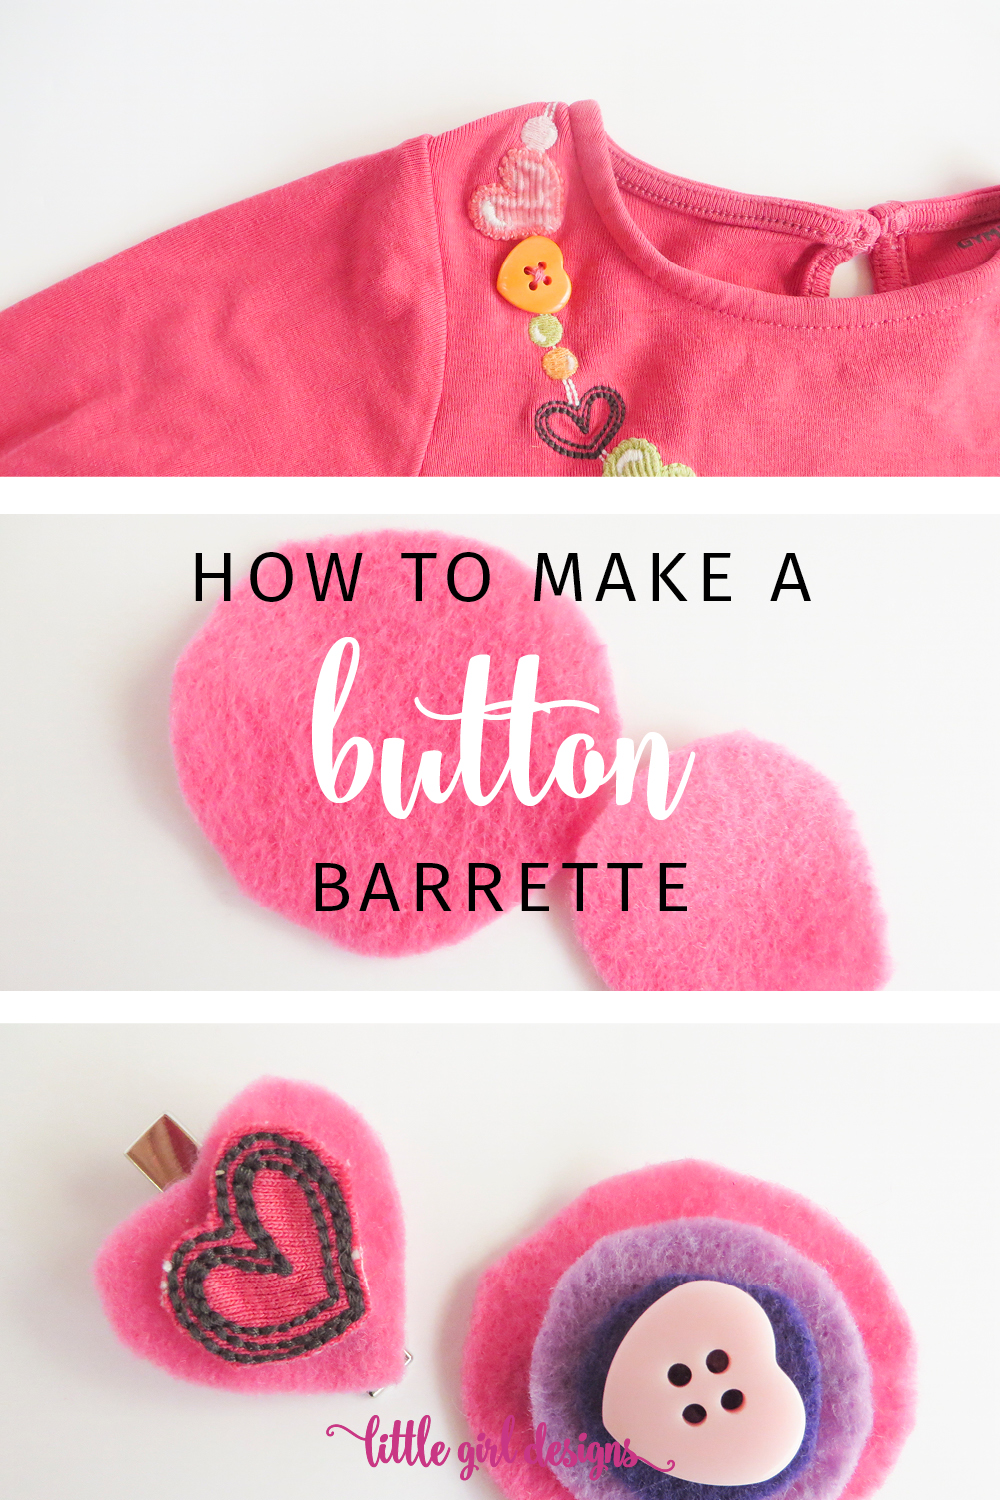 How to Make a Button Barrette (Upcycled!)